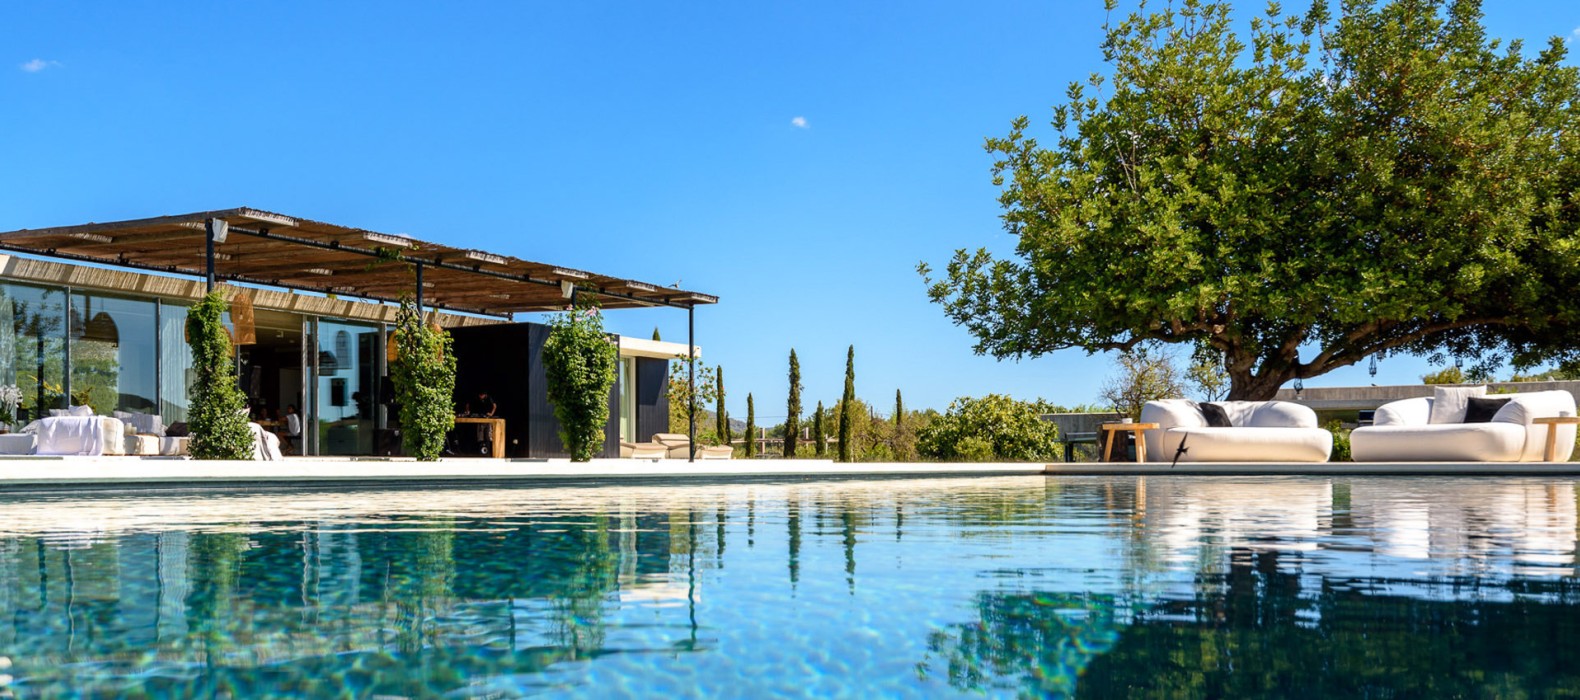 Pool view of Villa Lucerne in Ibiza